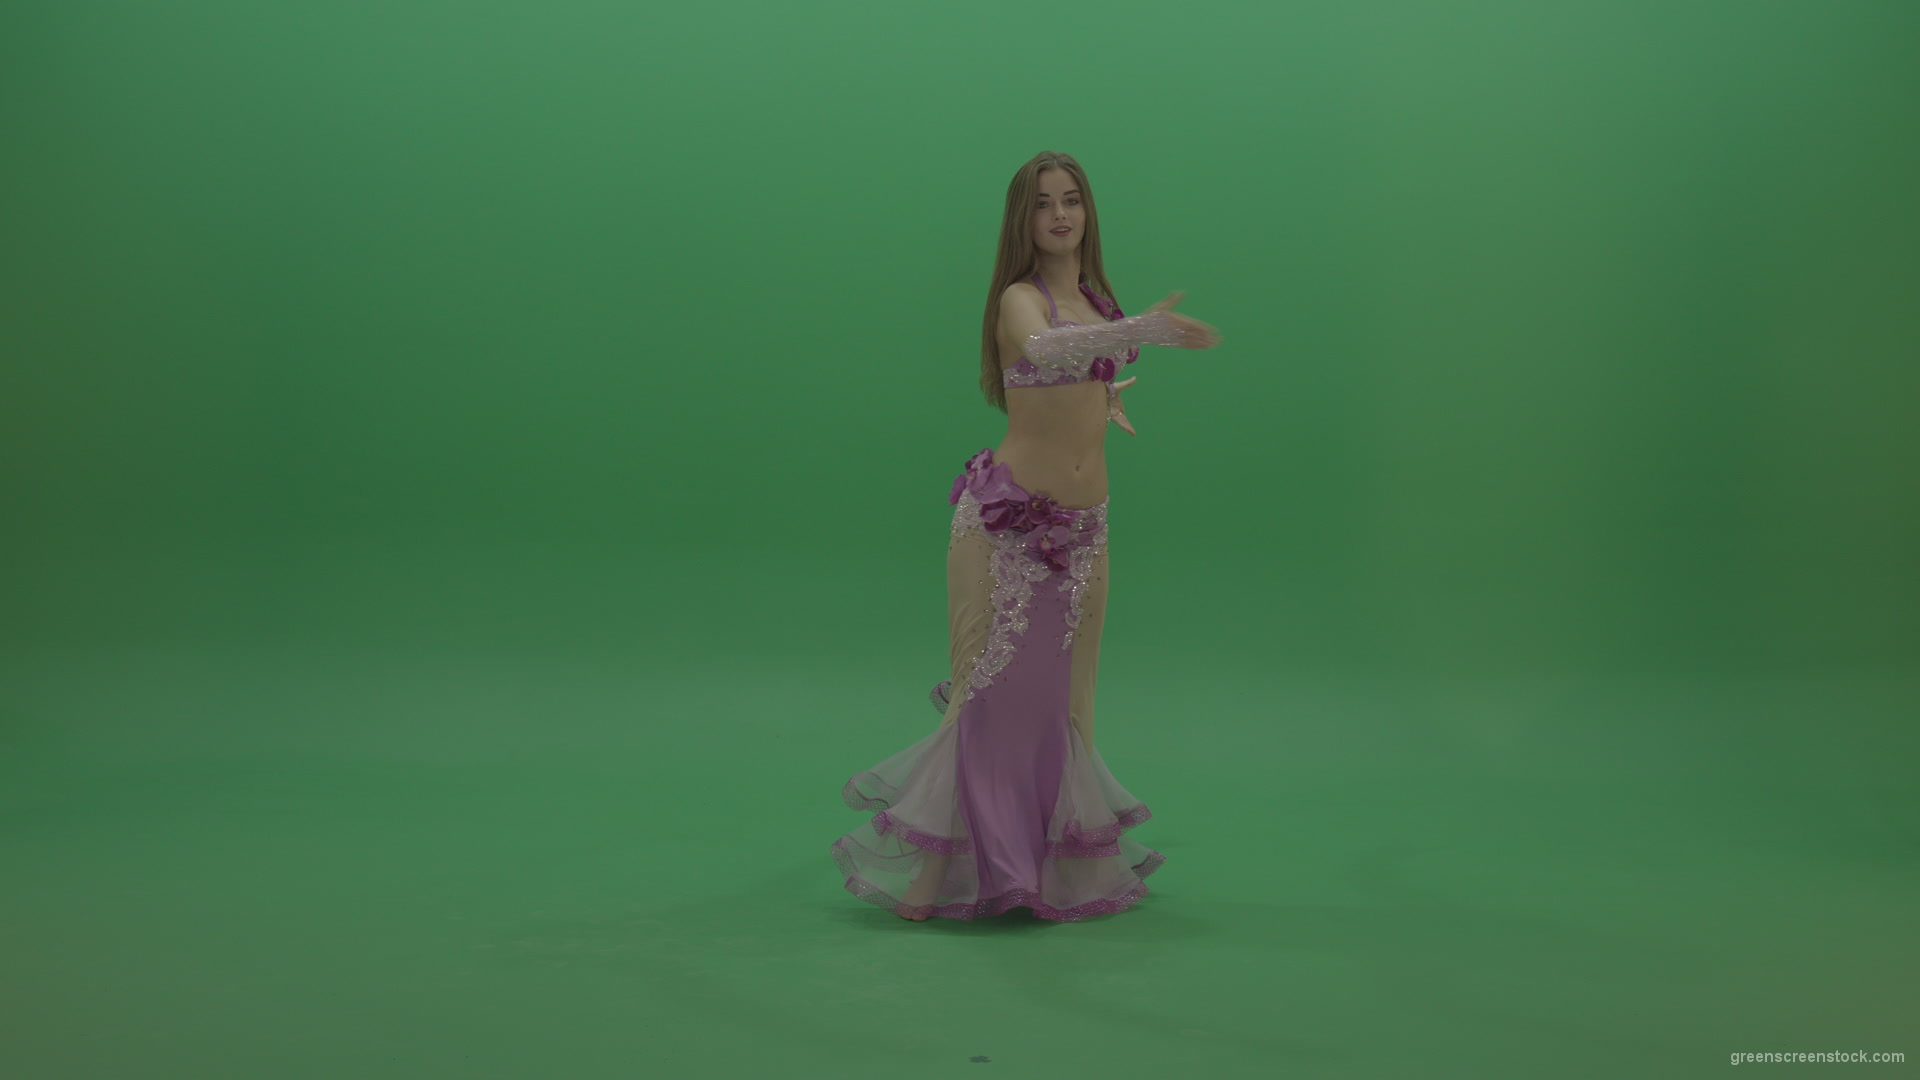 Sightly-belly-dancer-in-pink-wear-display-amazing-dance-moves-over-chromakey-background_002 Green Screen Stock